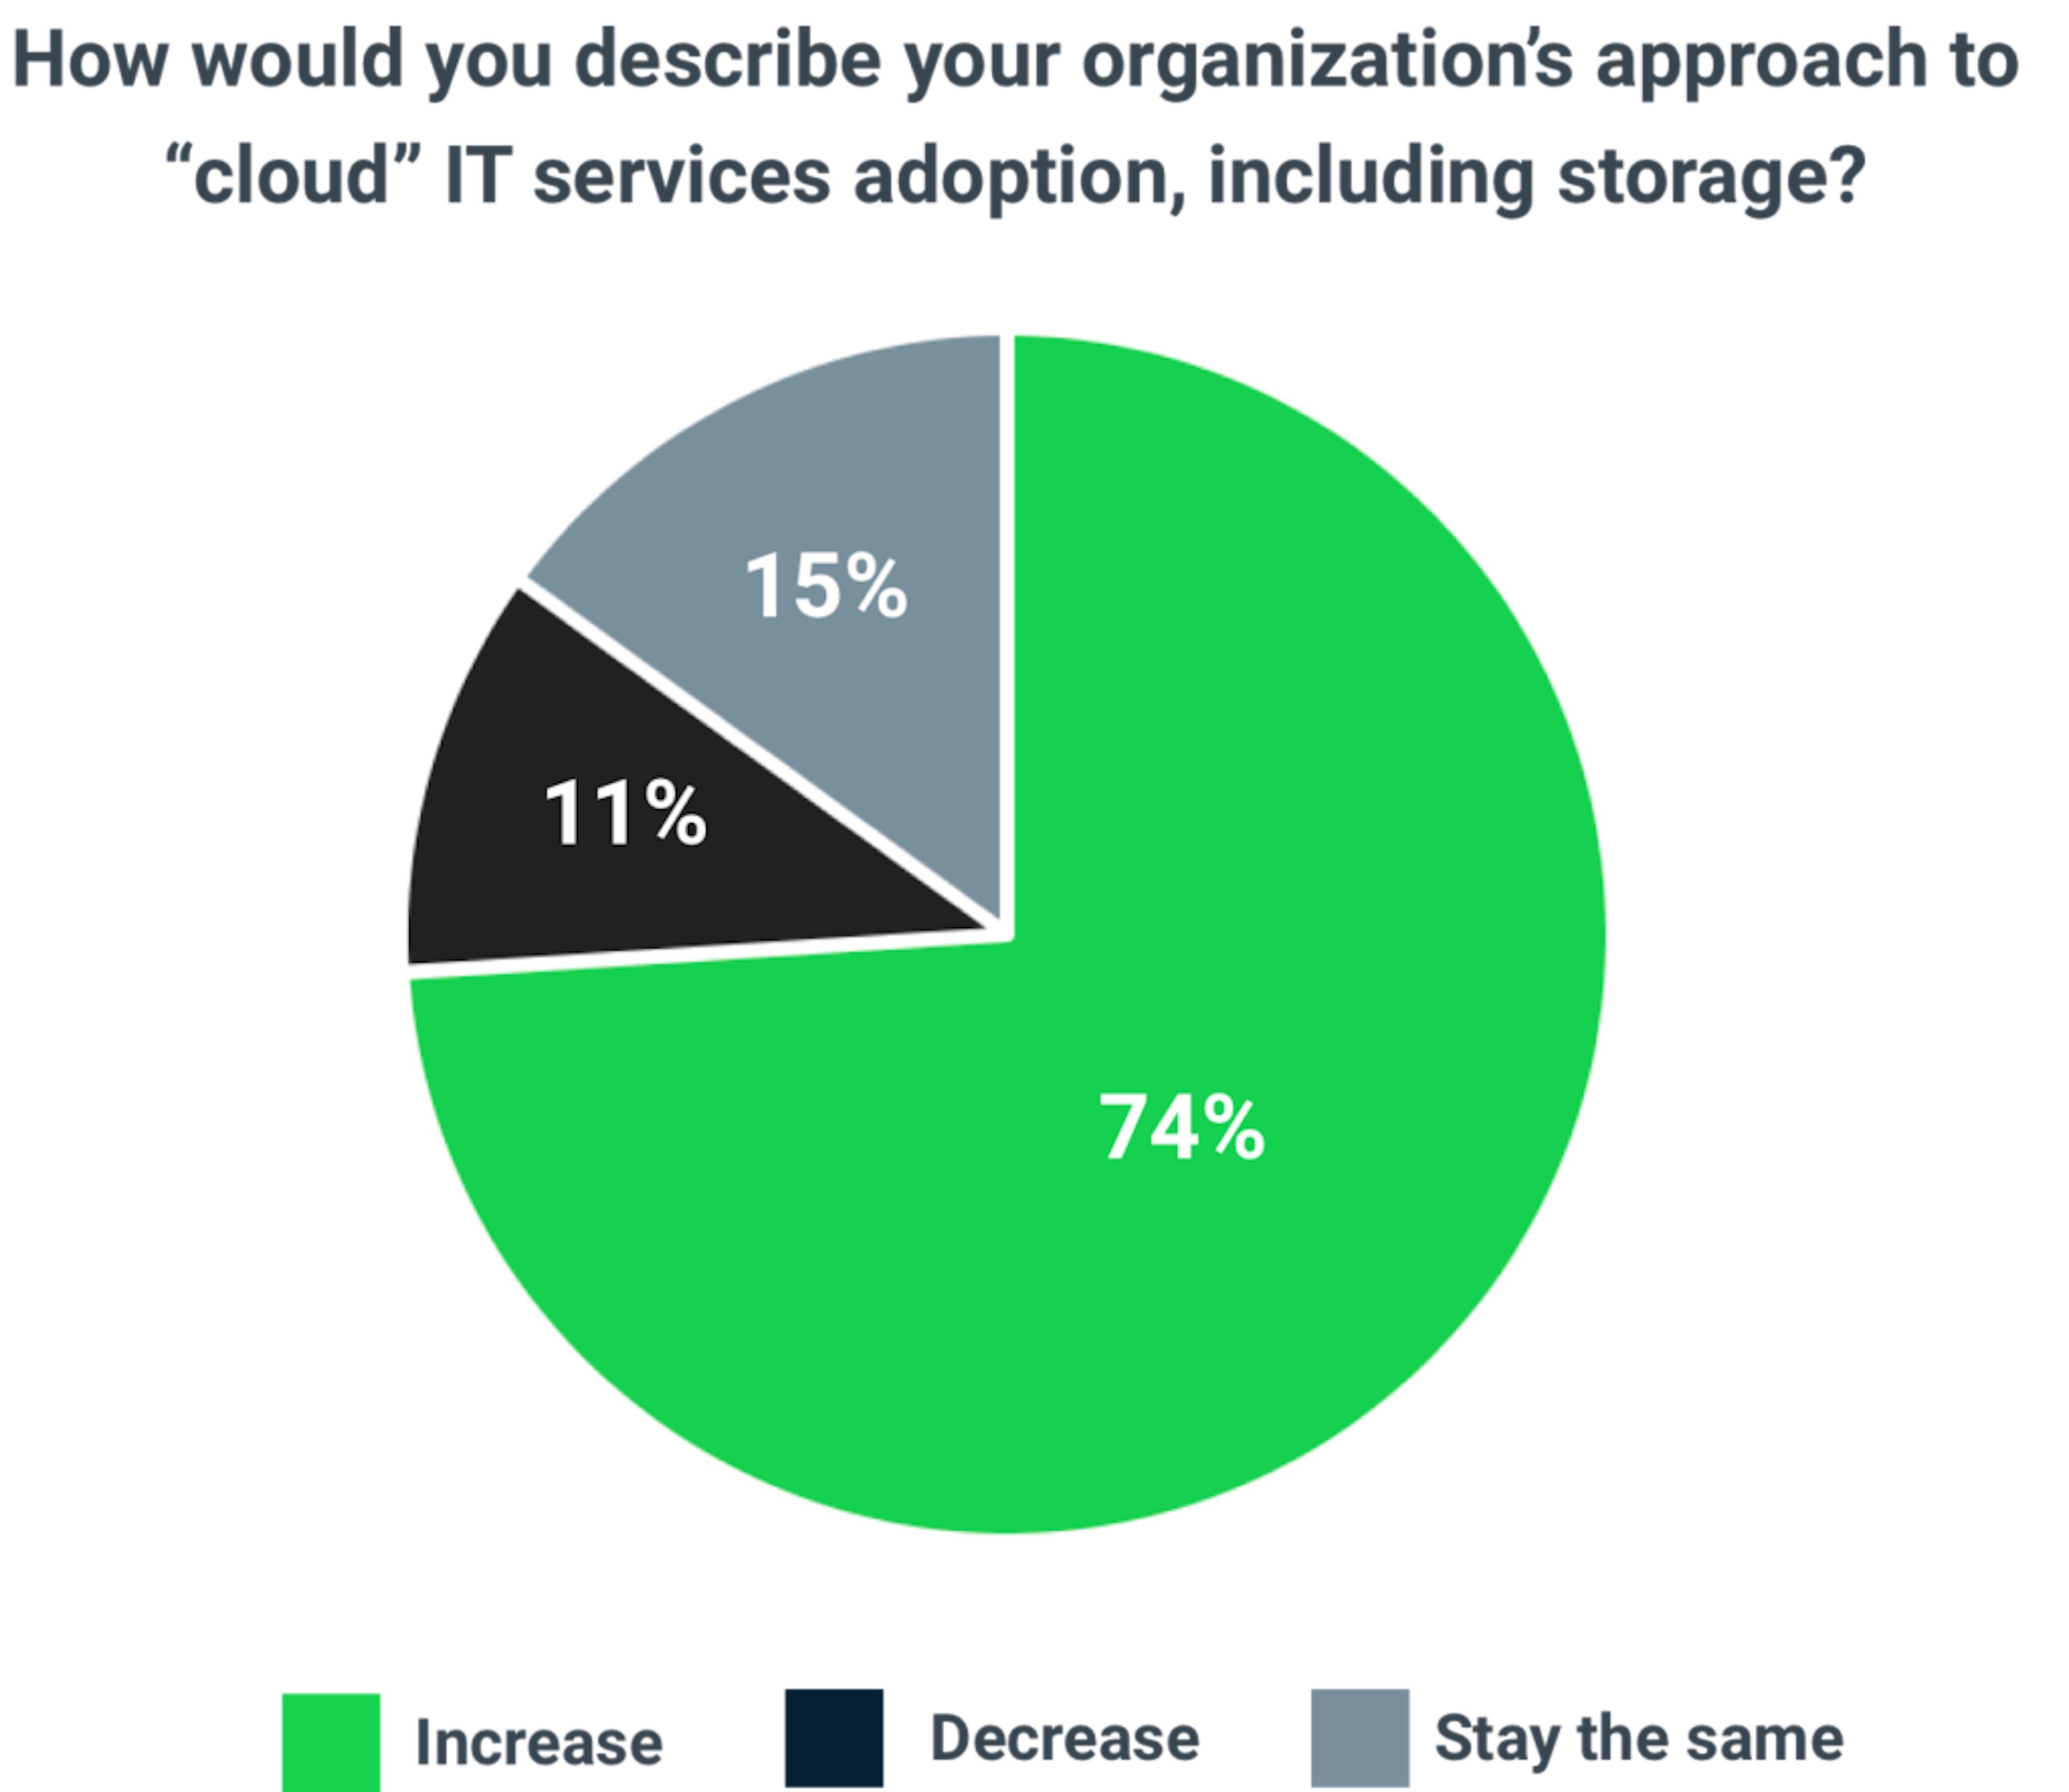 how would you describe your organization's approach to "cloud" IT services adoption, including storage? pie chart